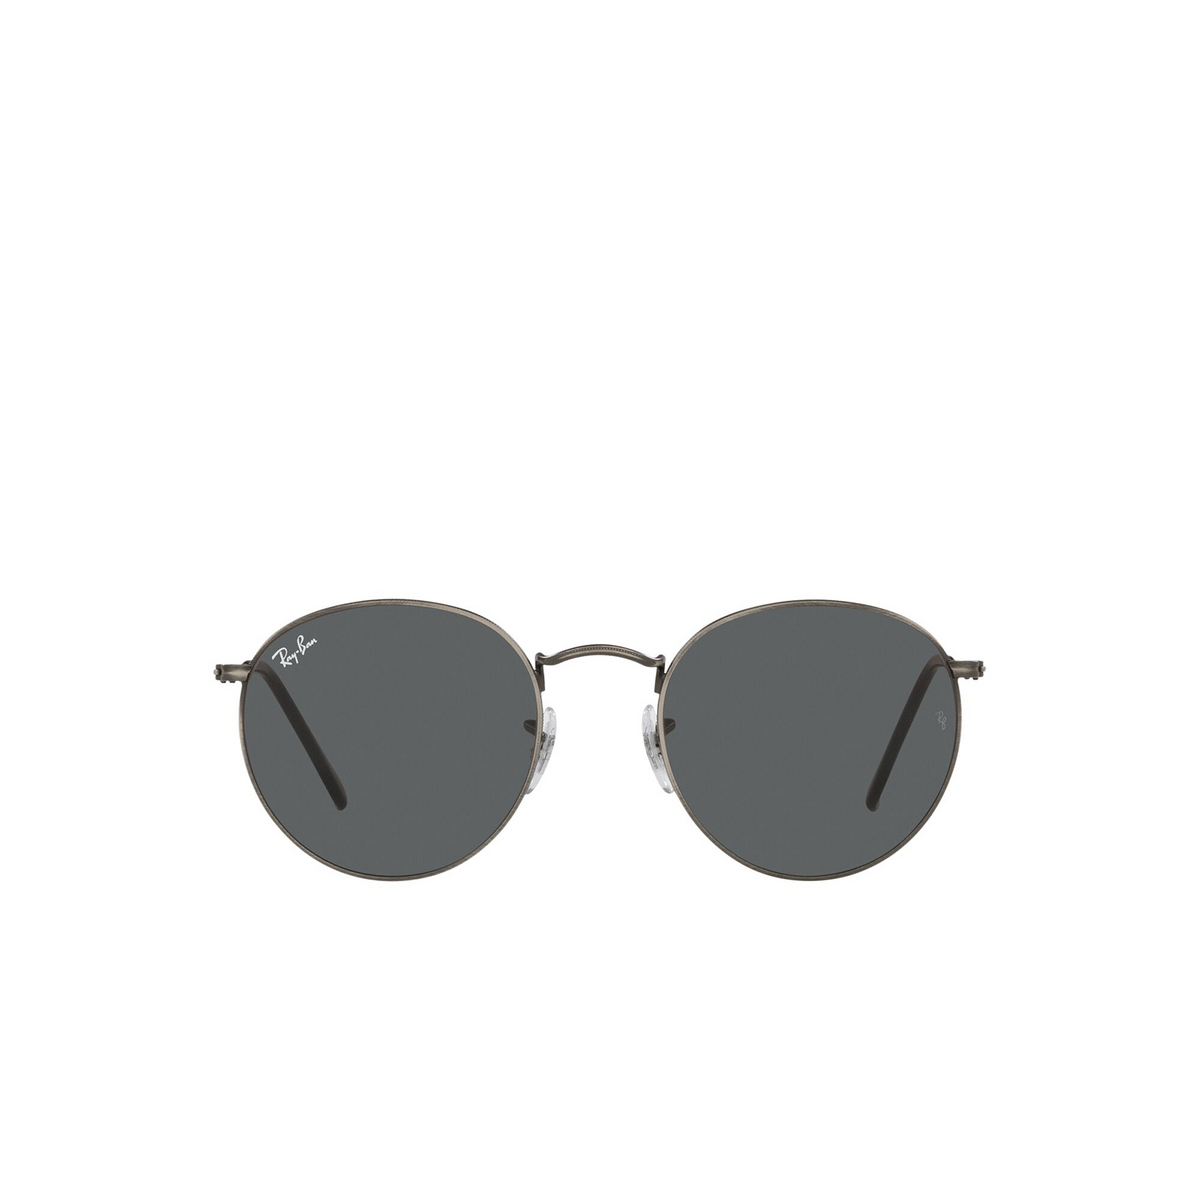 Ray-Ban ROUND METAL Sunglasses 9229B1 Antique Gunmetal - front view